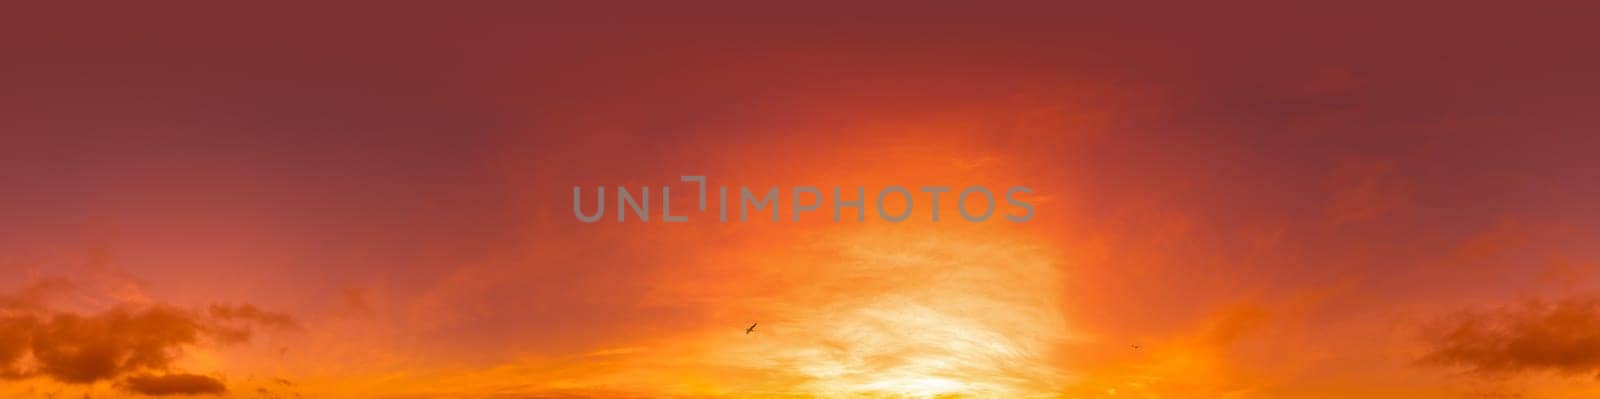 360 panorama of glowing sunset sky with bright pink Cirrus clouds. HDR 360 seamless spherical panorama. Full zenith or sky dome sky replacement for aerial drone panoramas. Climate and weather change. by Matiunina